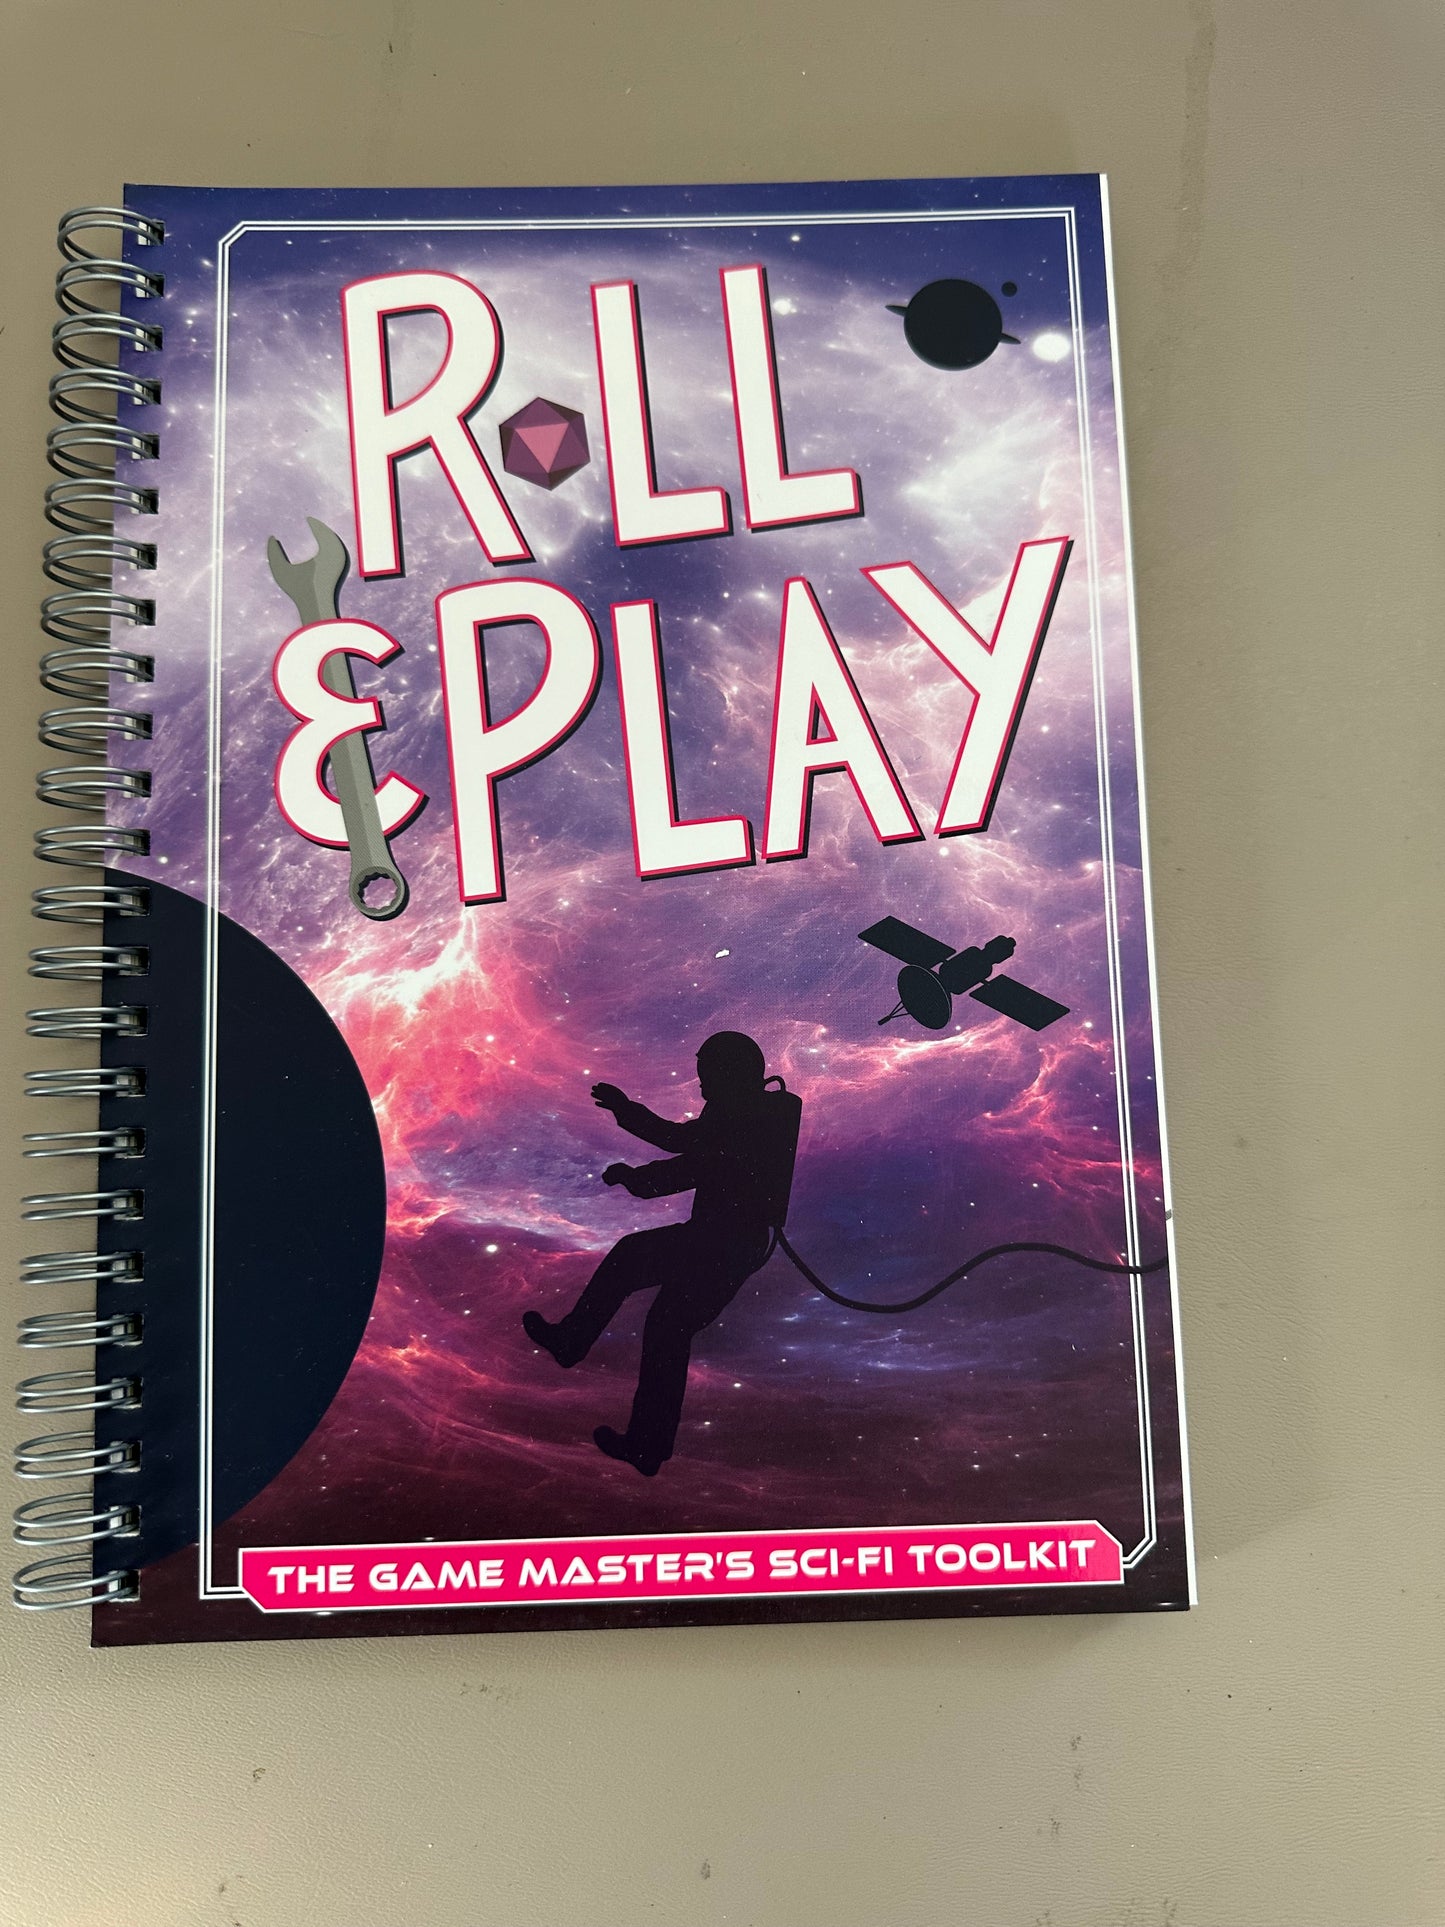 The Game Master SCi Fi Toolkit by Roll and Play Press